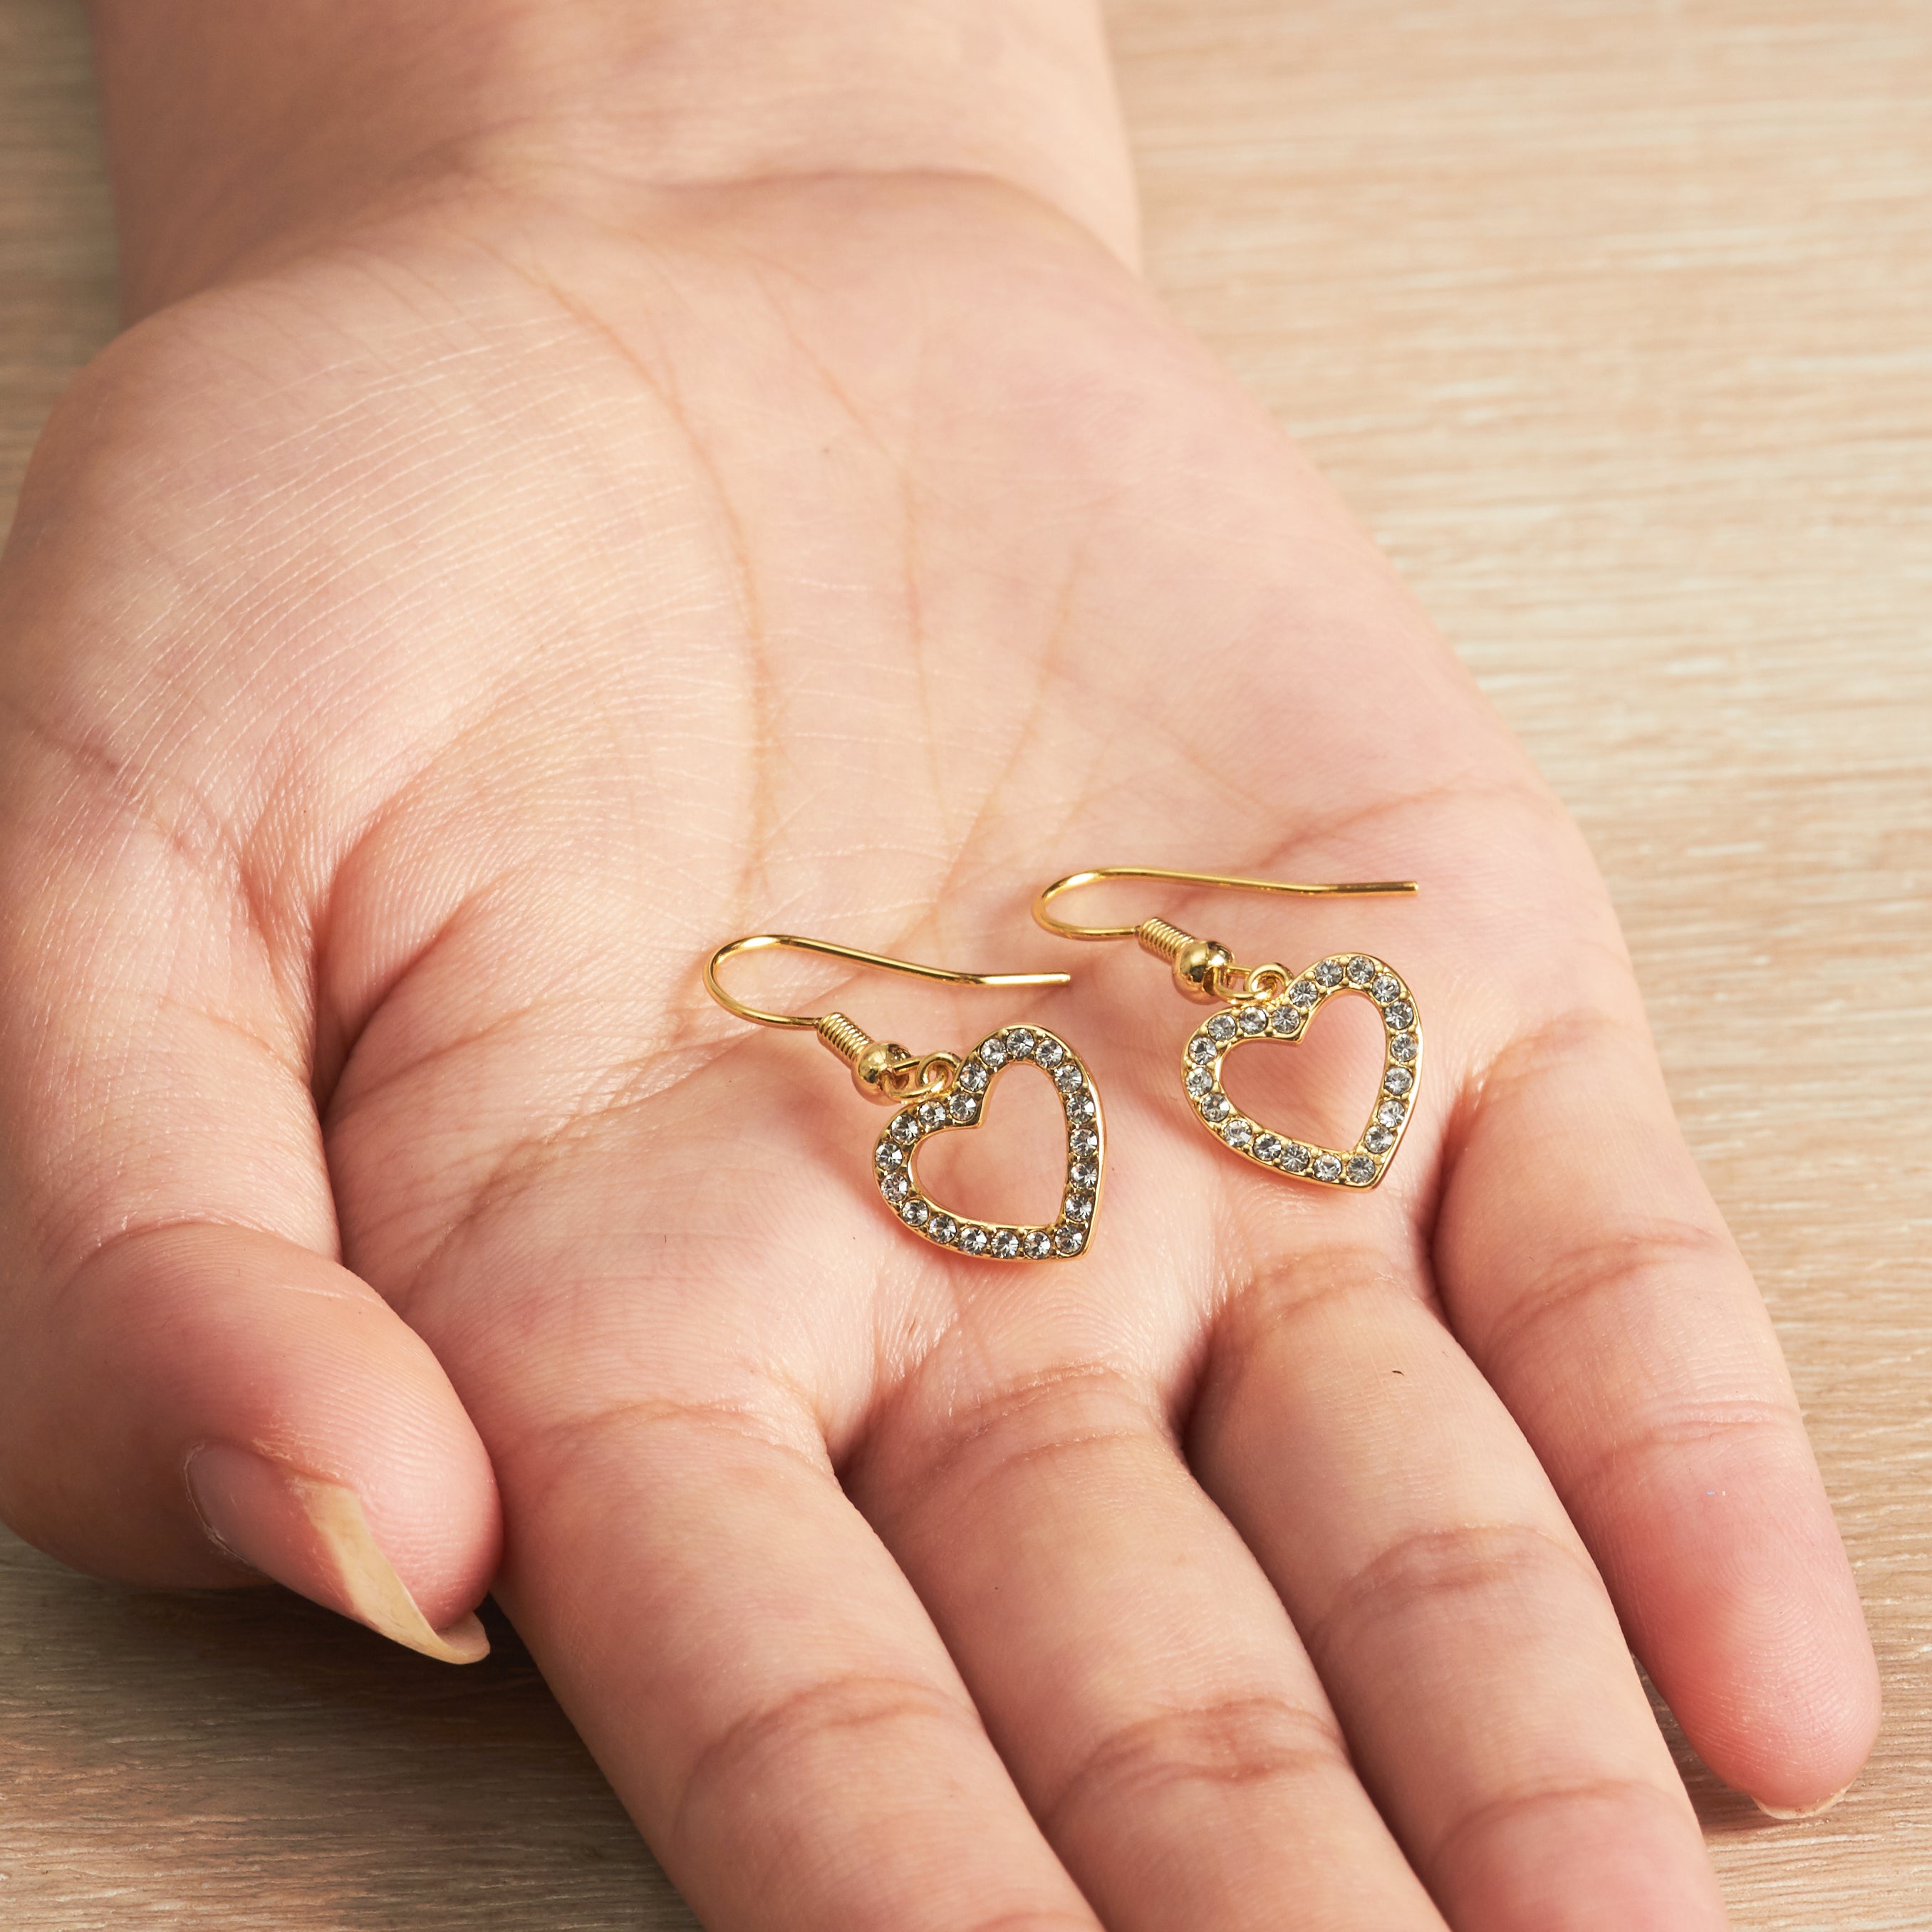 Gold Plated Open Heart Drop Earrings Created with Zircondia® Crystals